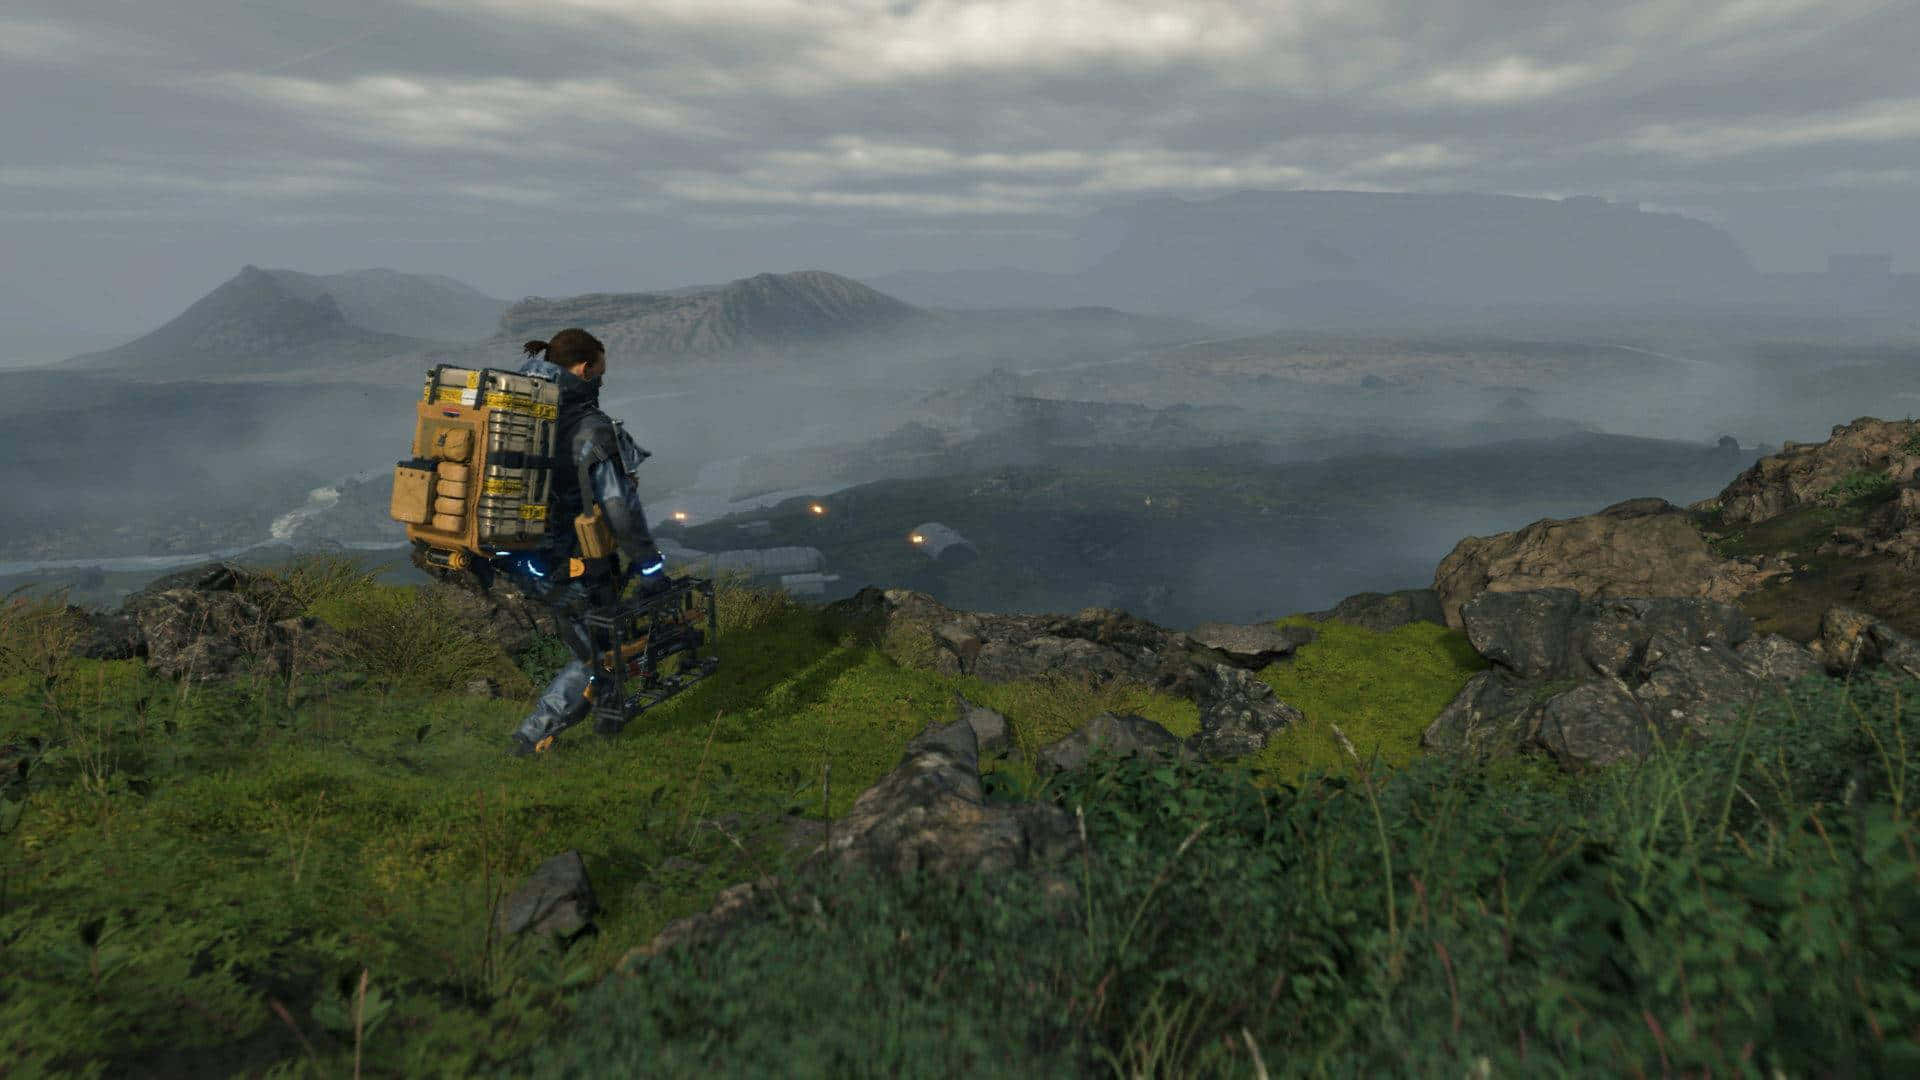 A Man Is Walking On A Hill With A Backpack